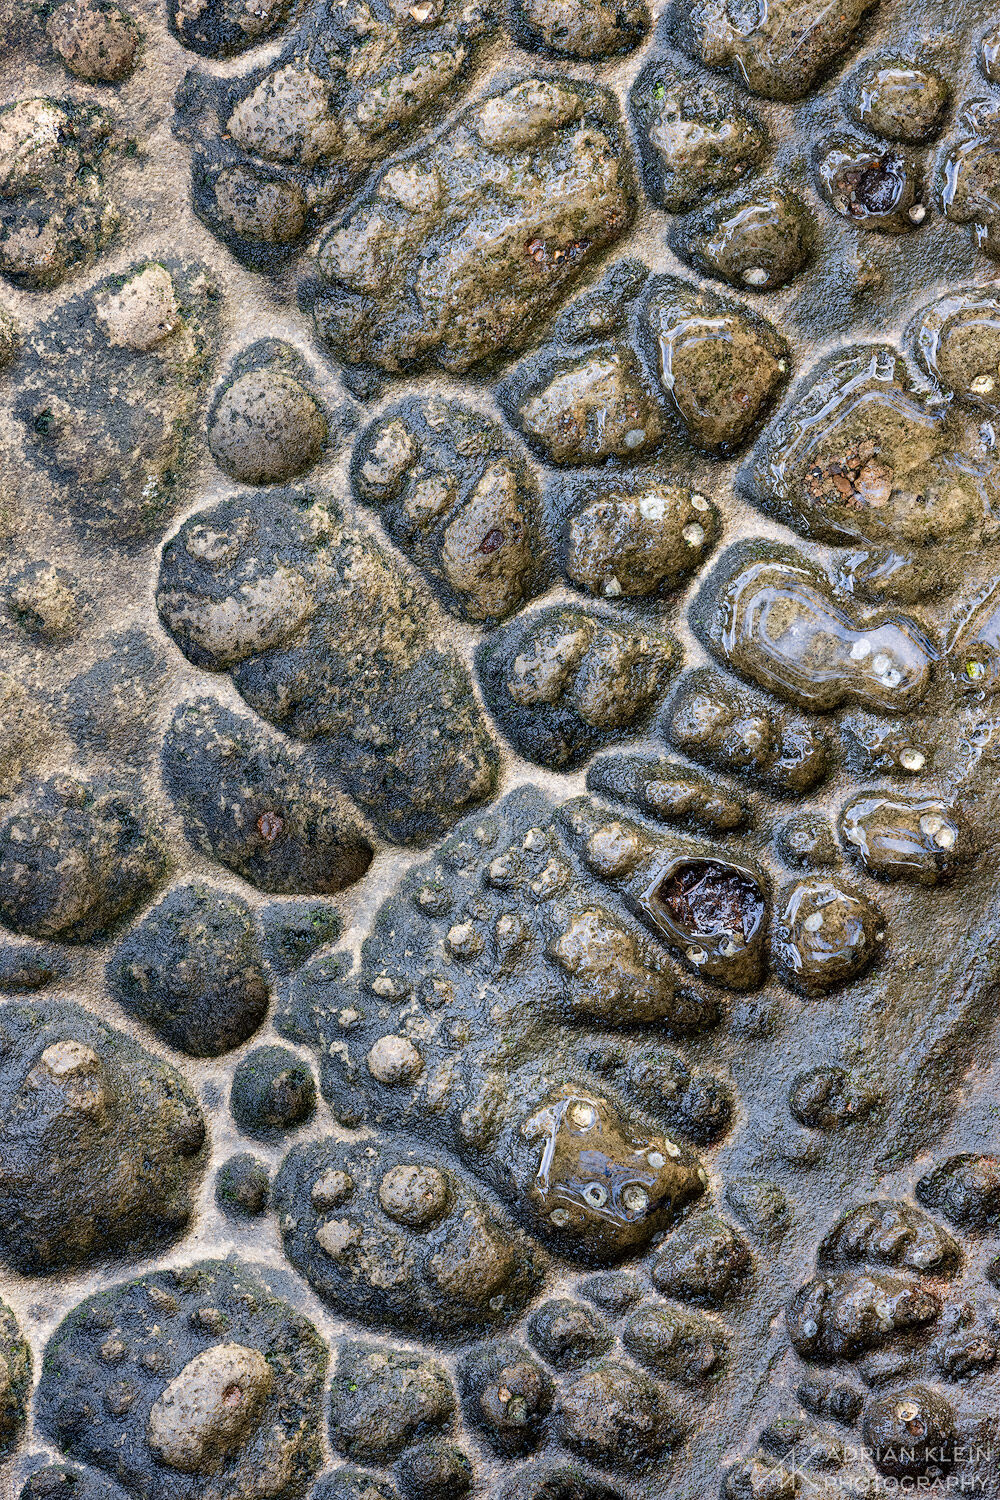 Sandstone worn out from the ocean waves creating unique texture and shapes. Limited Edition of 50.